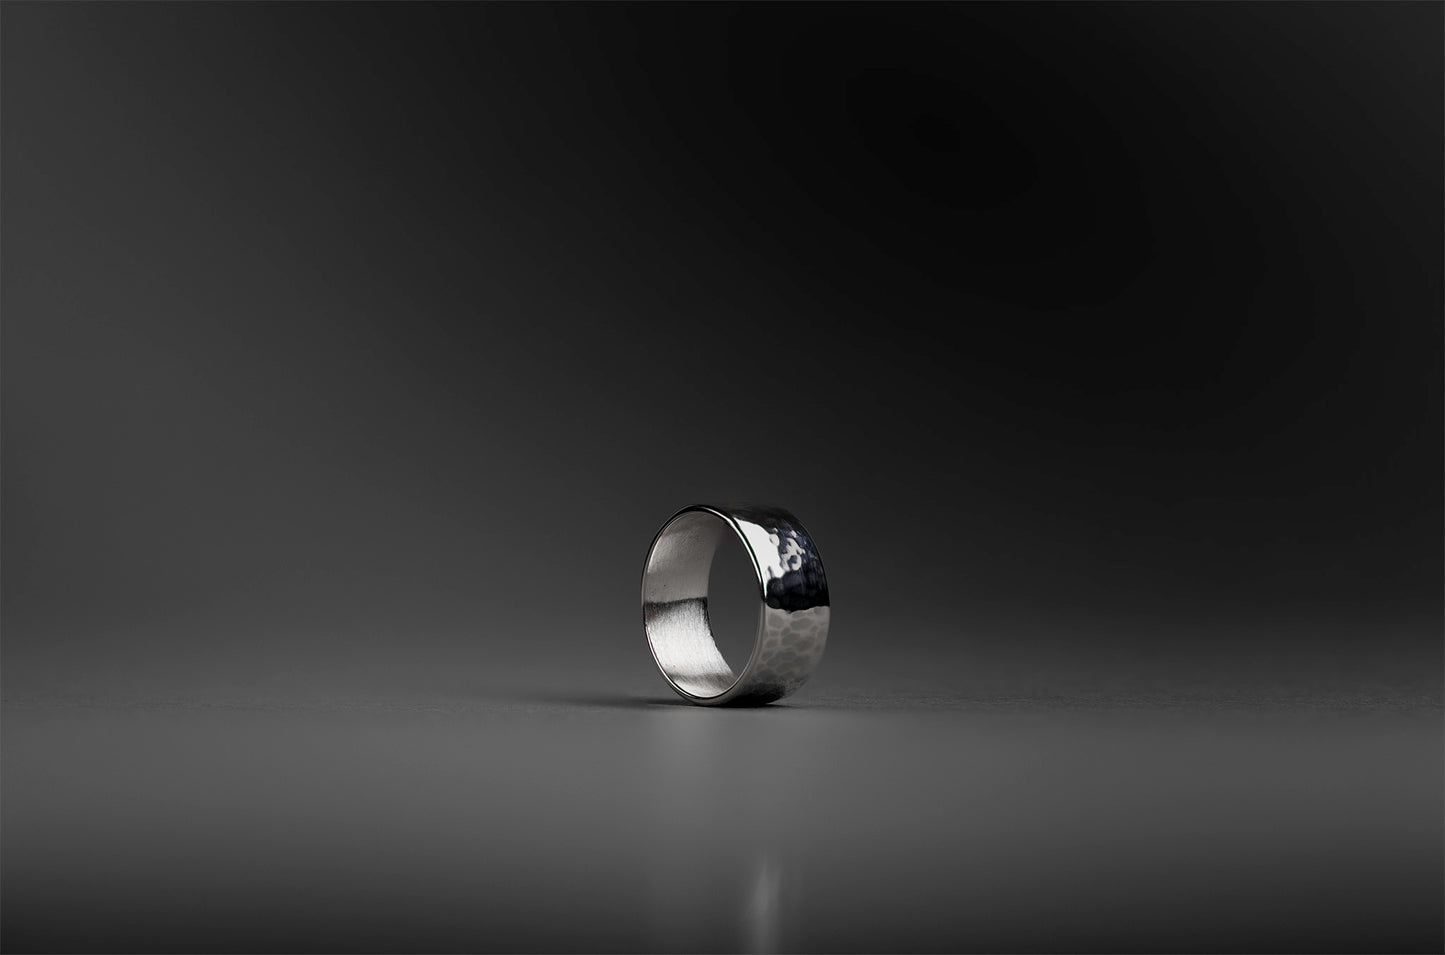 Ball Peen, Textured, Sterling Silver Ring, Hallmarked